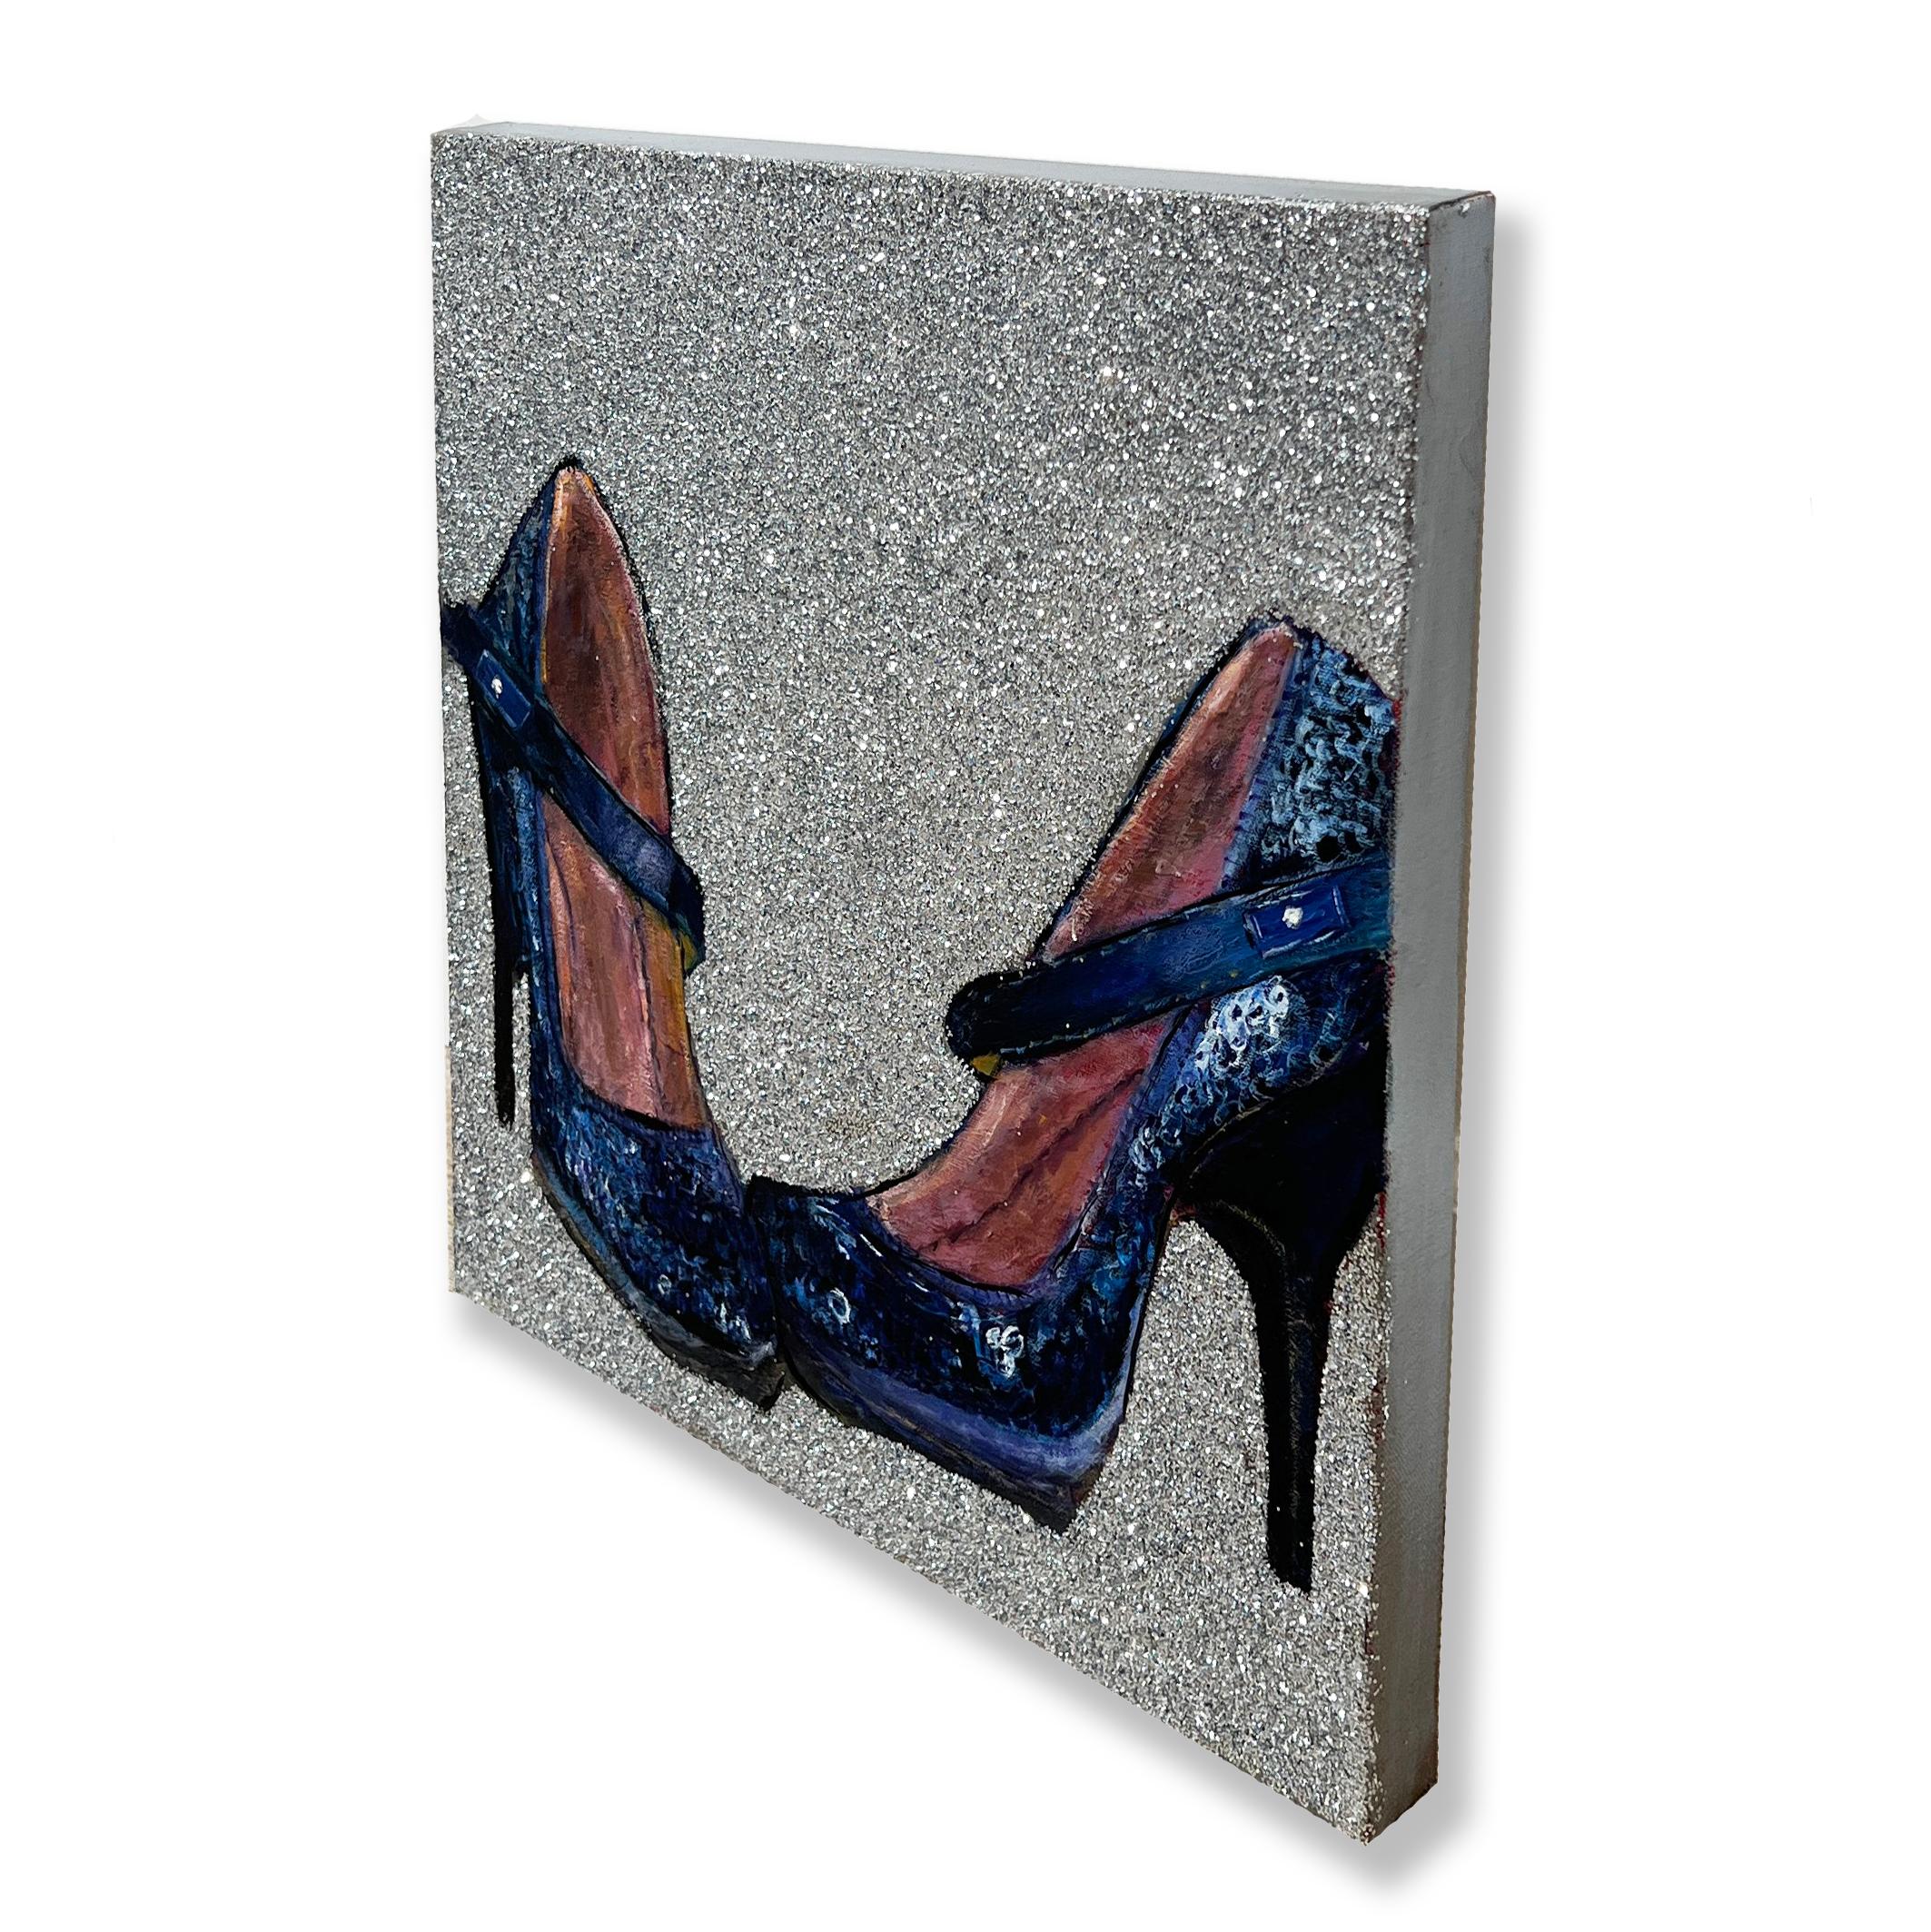 This 18 inch square mixed media painting on canvas is wired and ready to hang. It is hand signed by the artist on the back of the artwork. The background is covered in silver glitter which makes the artwork sparkle.

For over 20+ years, Haleh